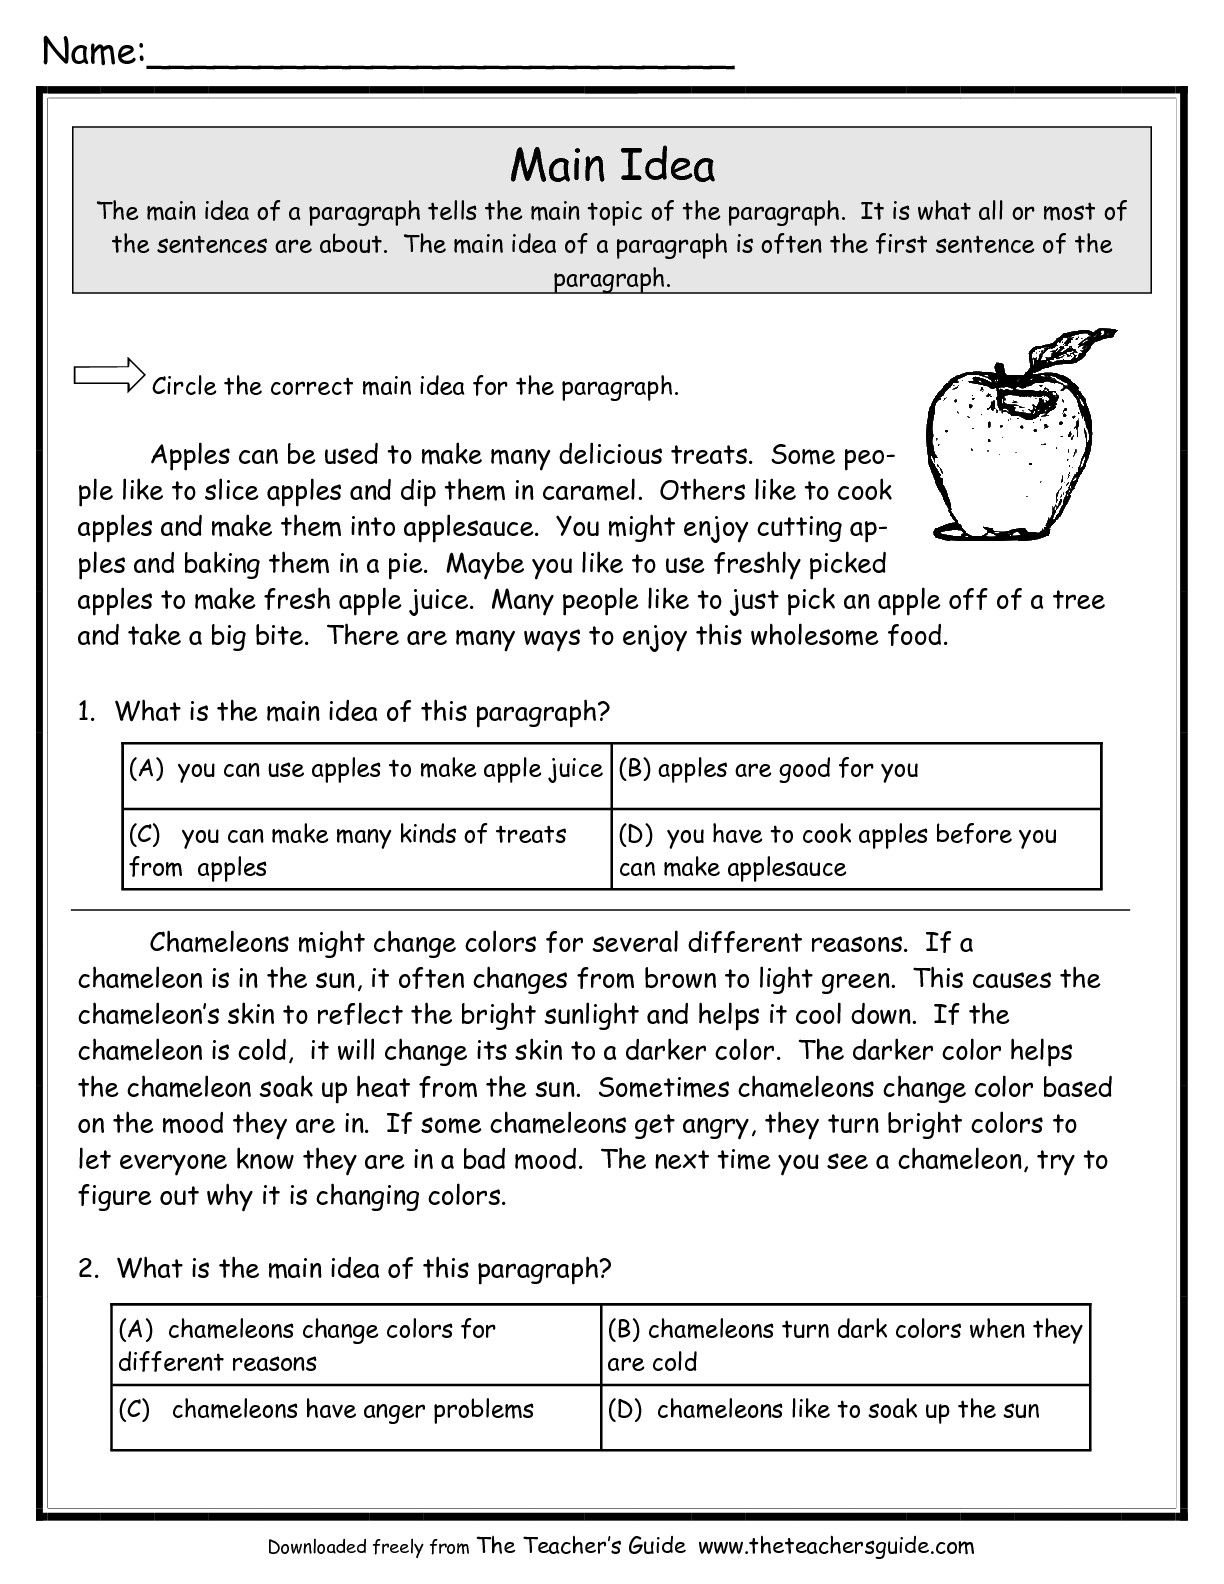 10 Spectacular Main Idea Worksheets For 5Th Grade main idea worksheets from the teachers guide resources for work 23 2022